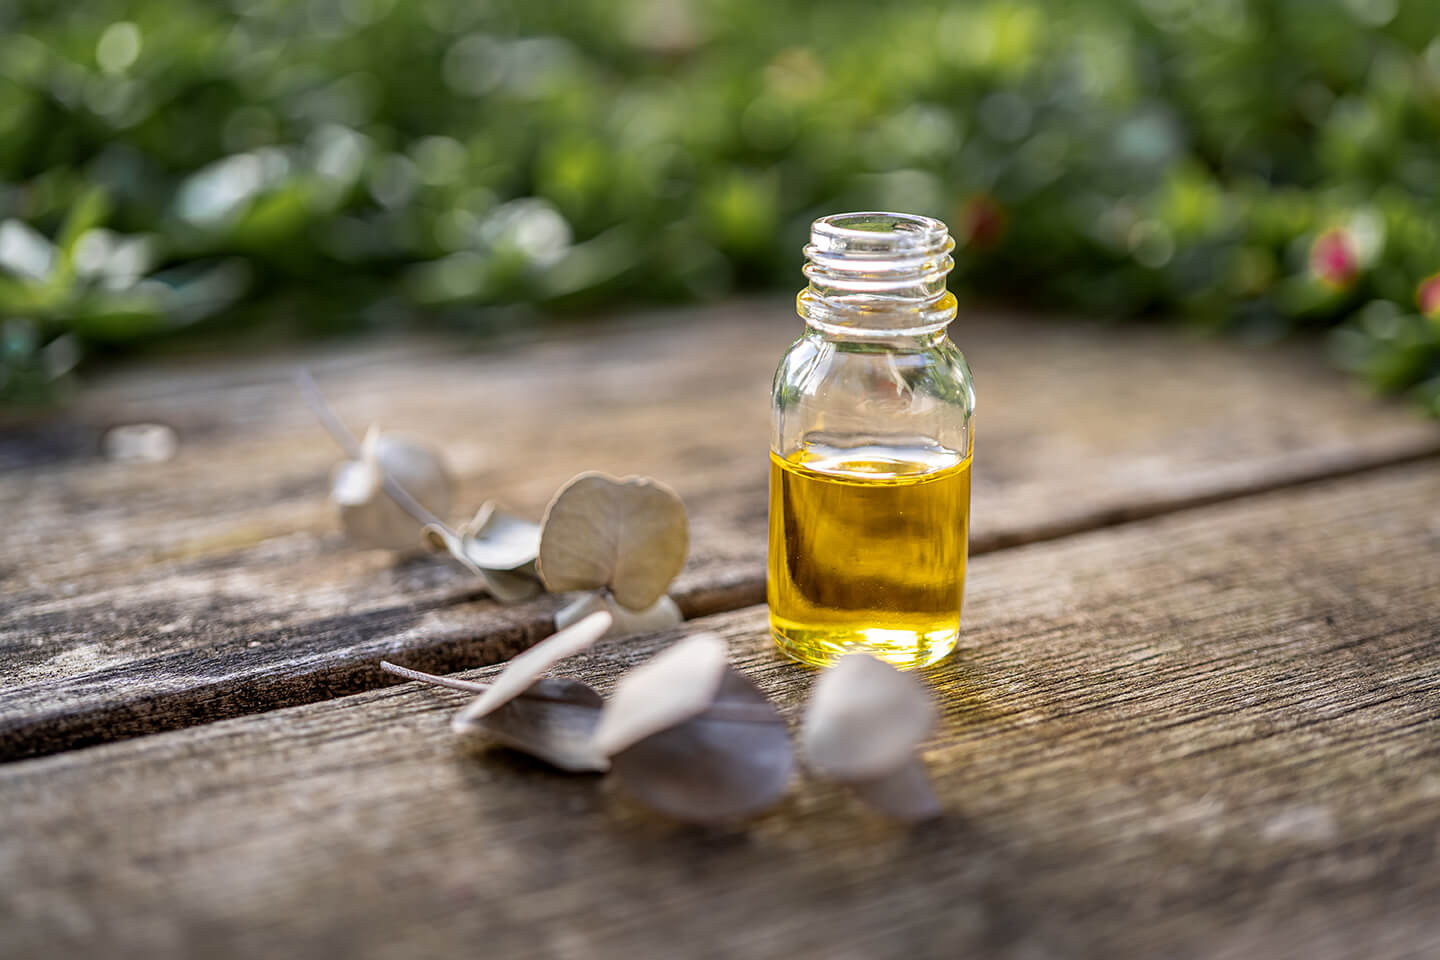 Eucalyptus Radiata oil in a small bottle and Eucalyptus Radiata leaves over the wooden surface